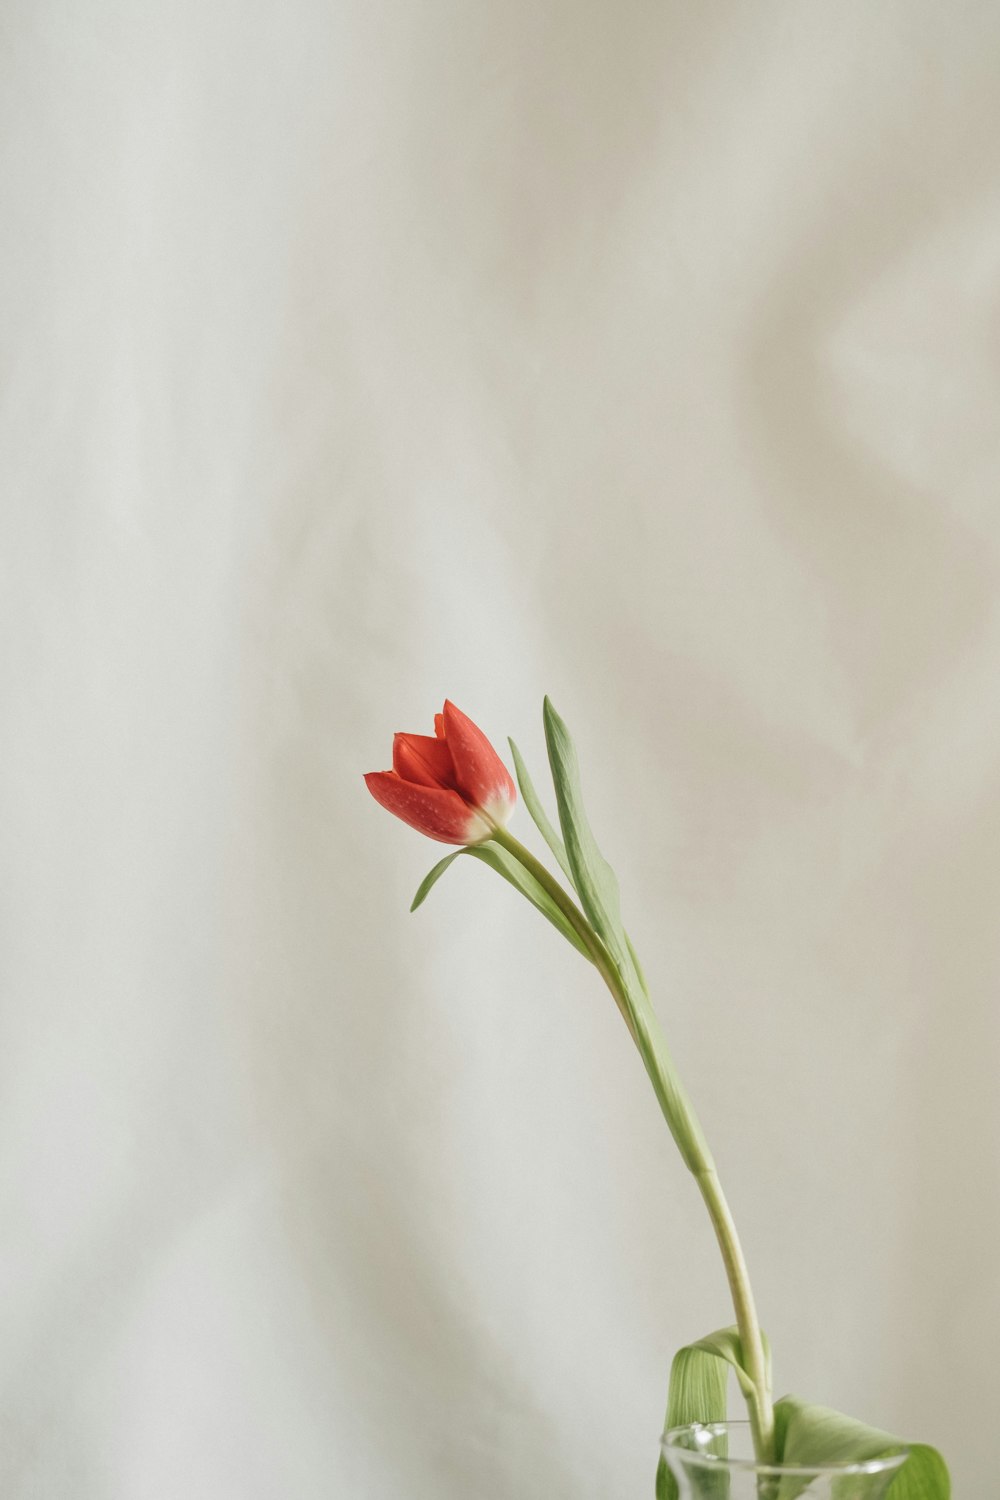 a single red flower in a glass vase